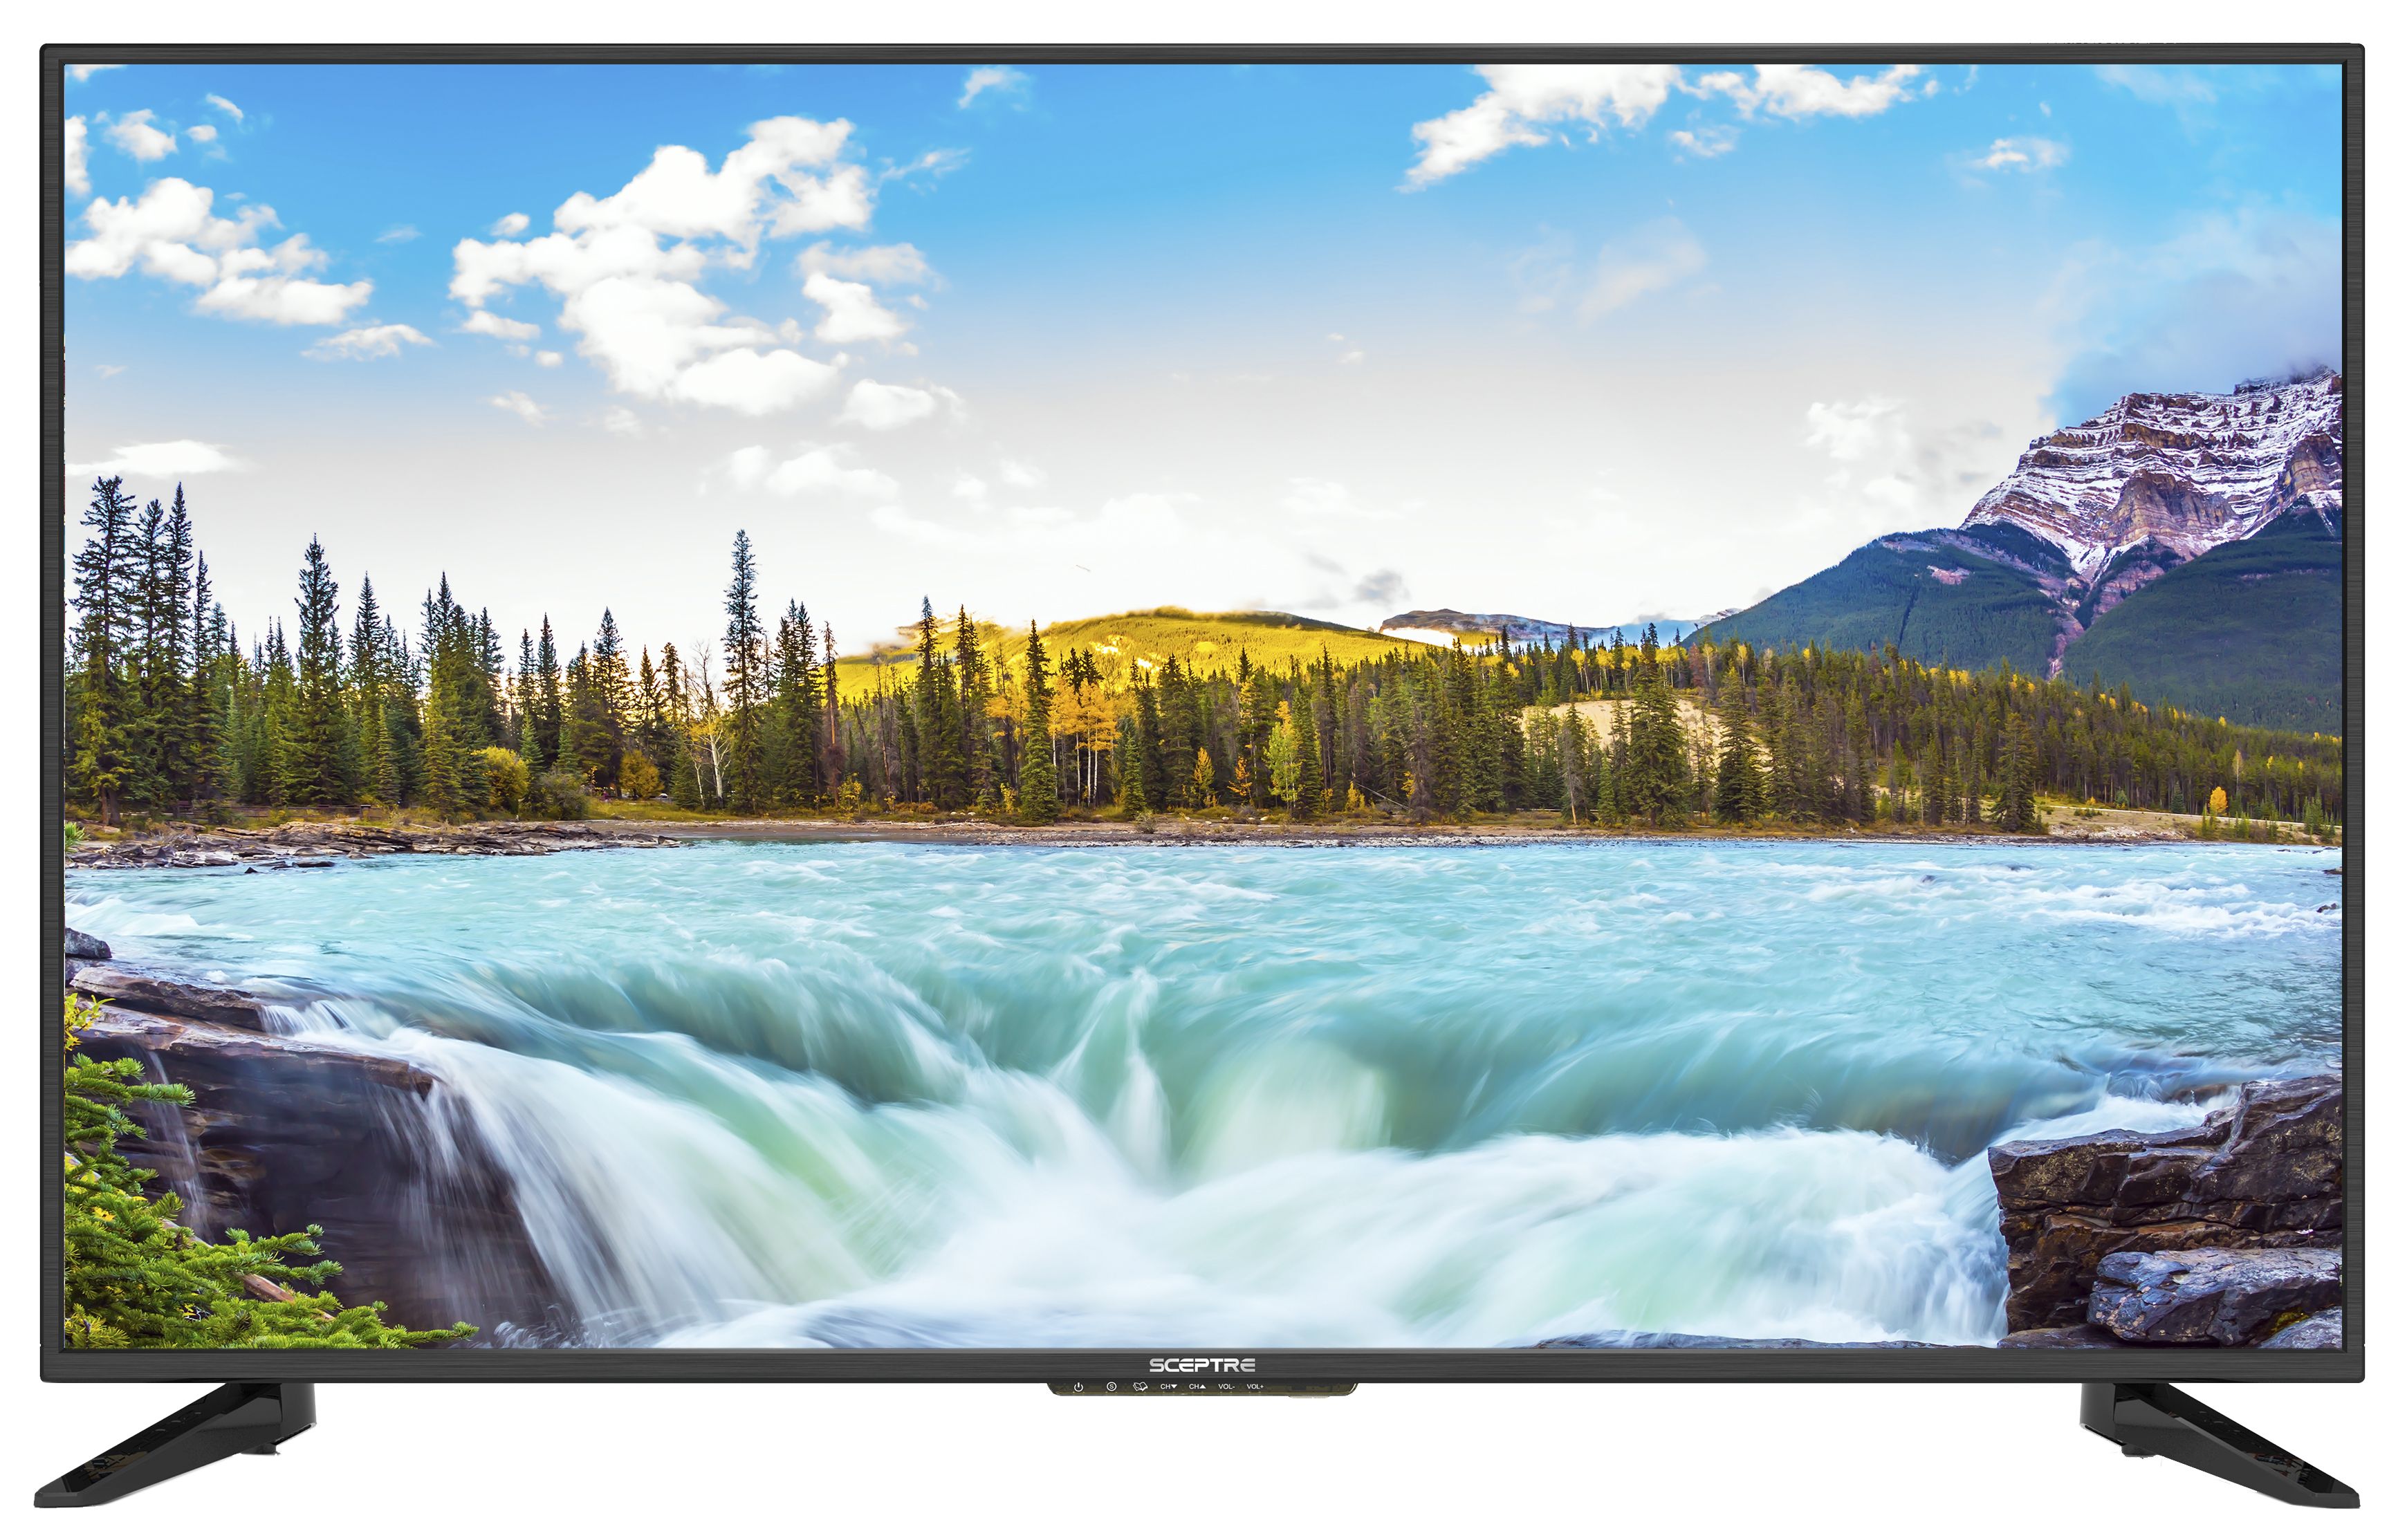 Sceptre 50-in Class FHD LED TV...